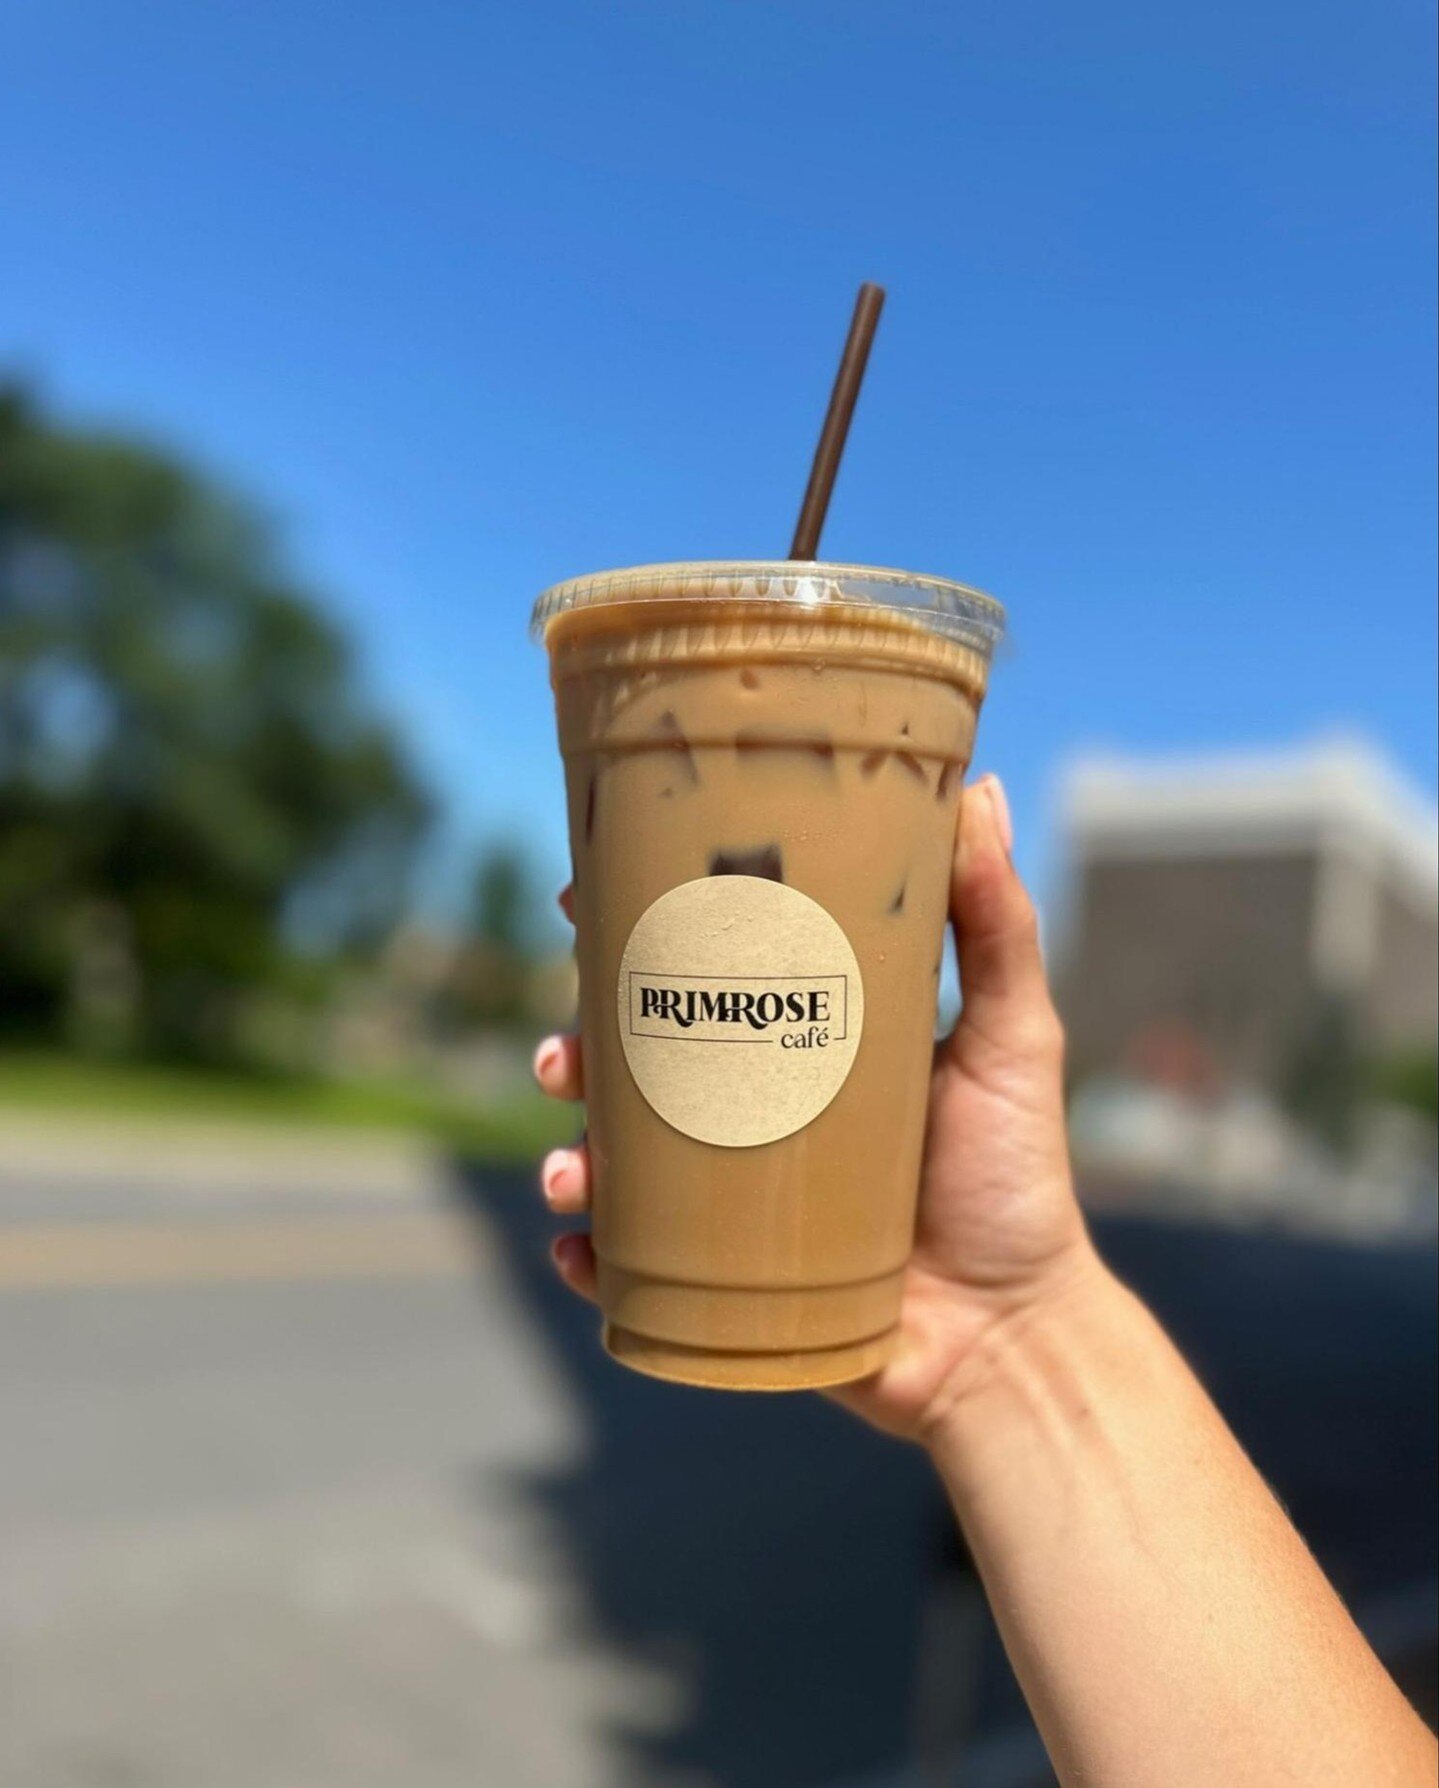 Who else misses this summer view? 😍

An iced coffee + the sun = an awesome summer throwback

#primrosecafe #pink #primrose #foodie #lunch #brunch #eatingout #downtownalbany #lunchdate #518 #upstateny #food #icedcoffee